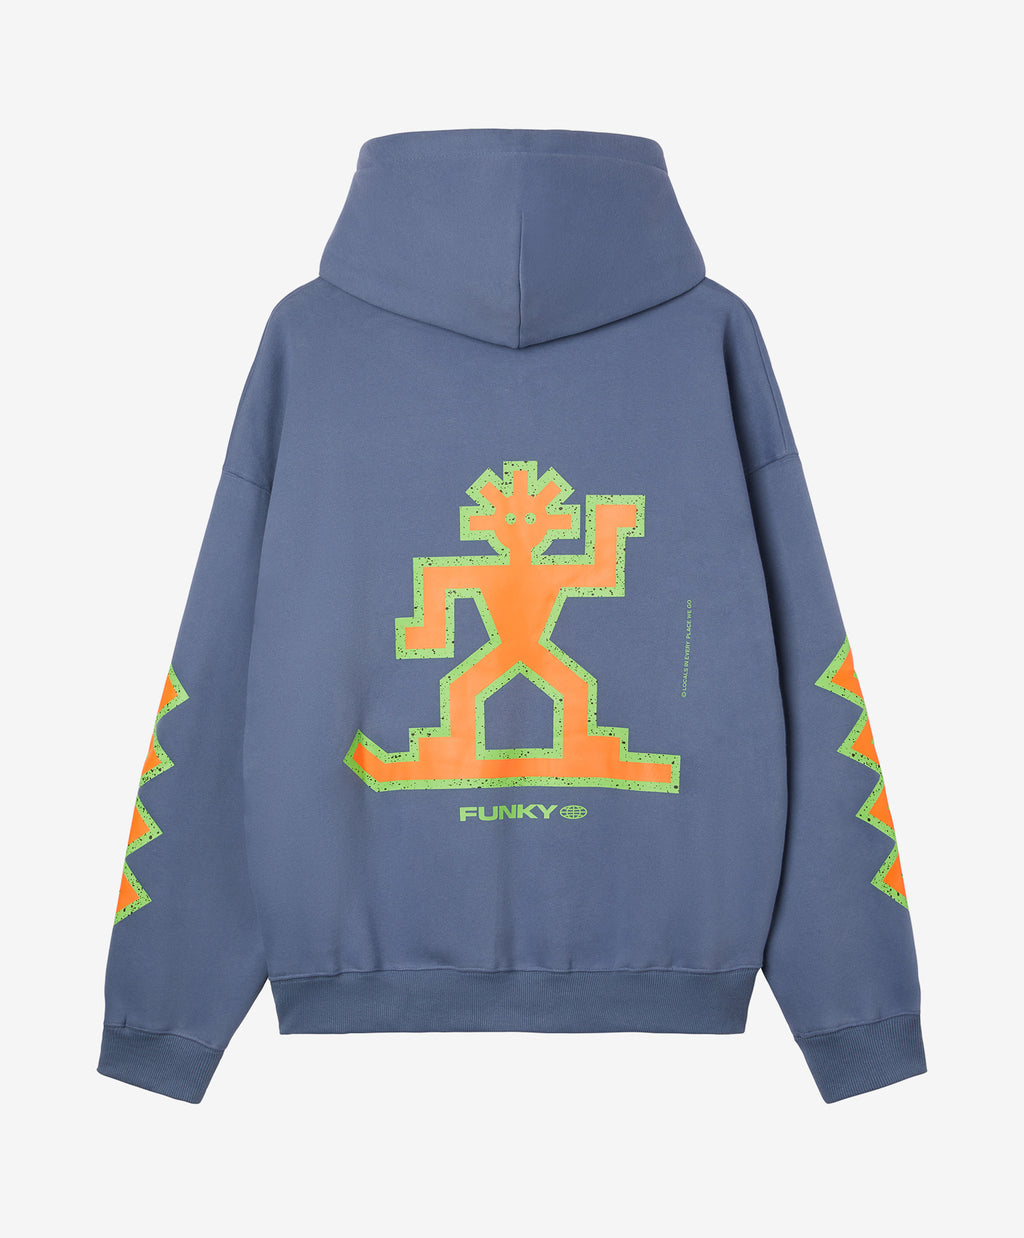 FUNKY RIDER HOODIE WHALE – Funkysnowboards